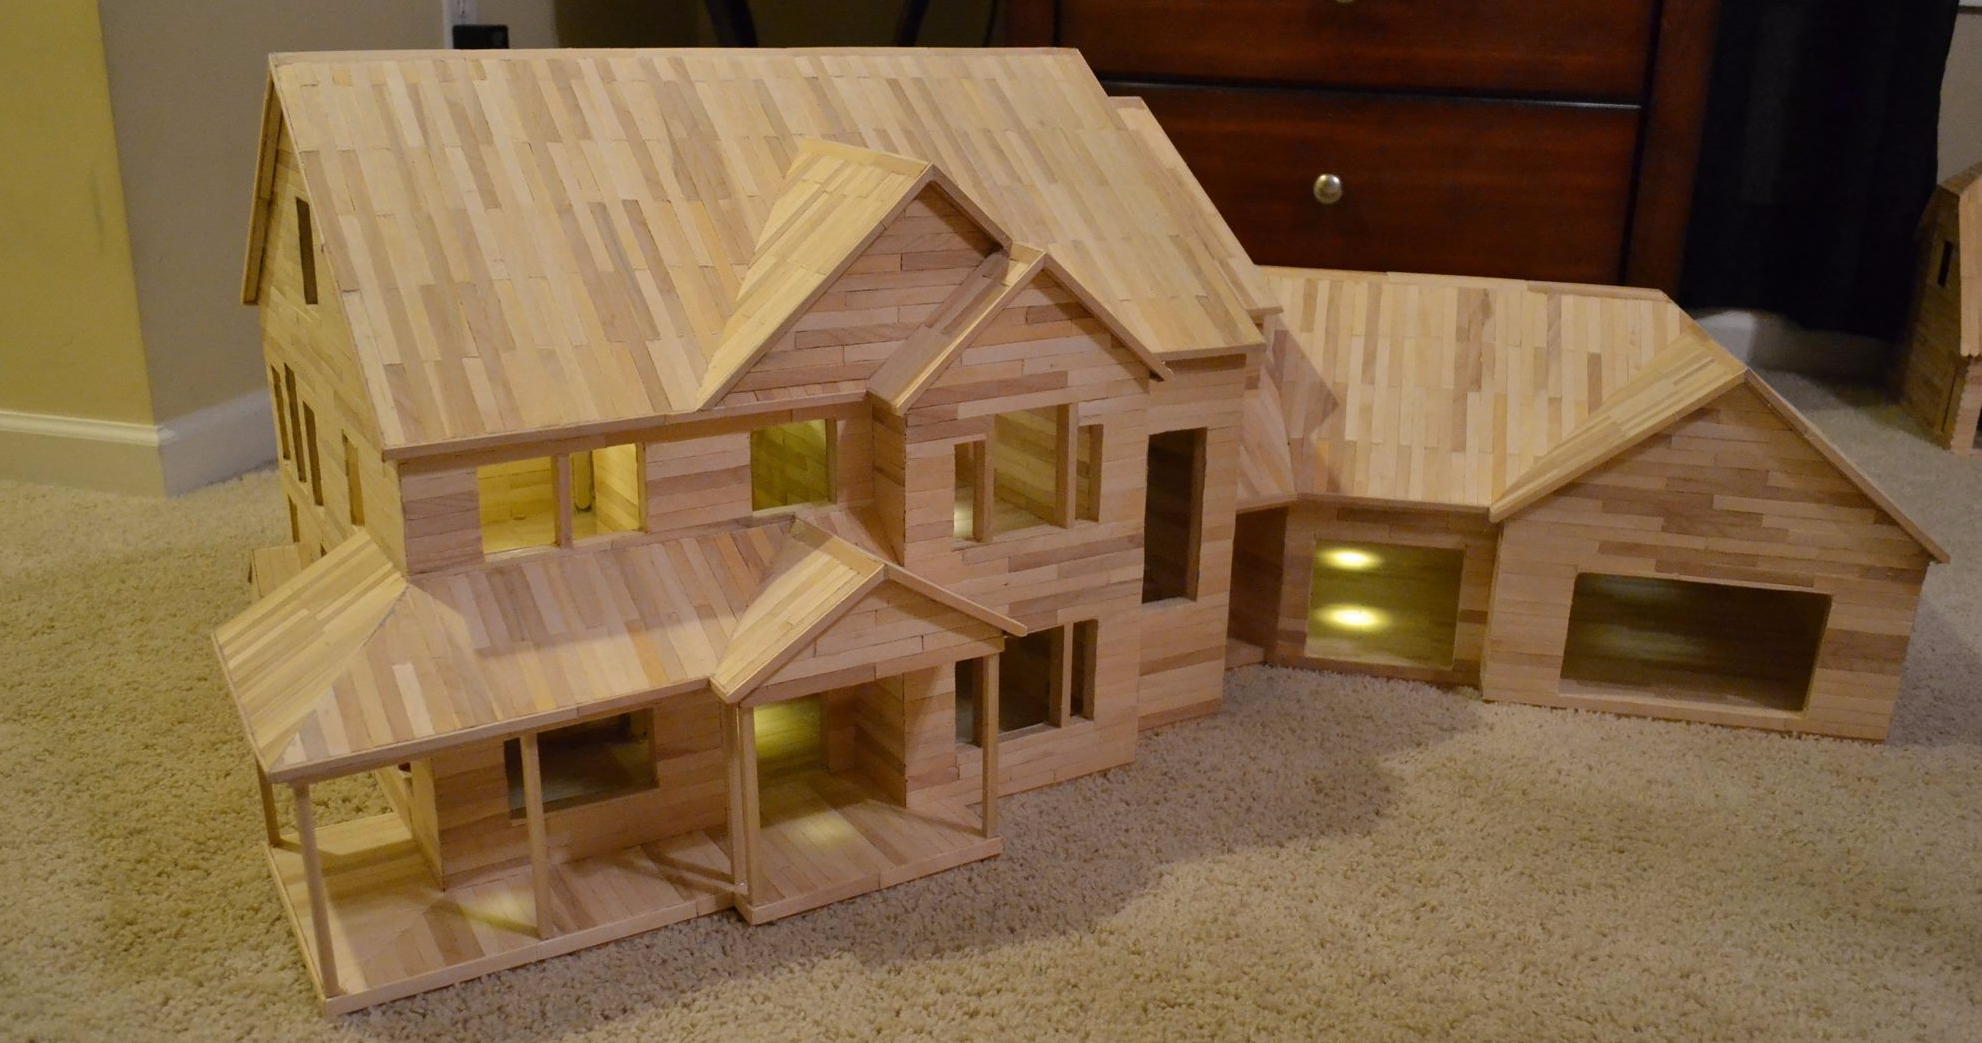 This Mansion Made of Popsicle Sticks Is Nicer Than My House